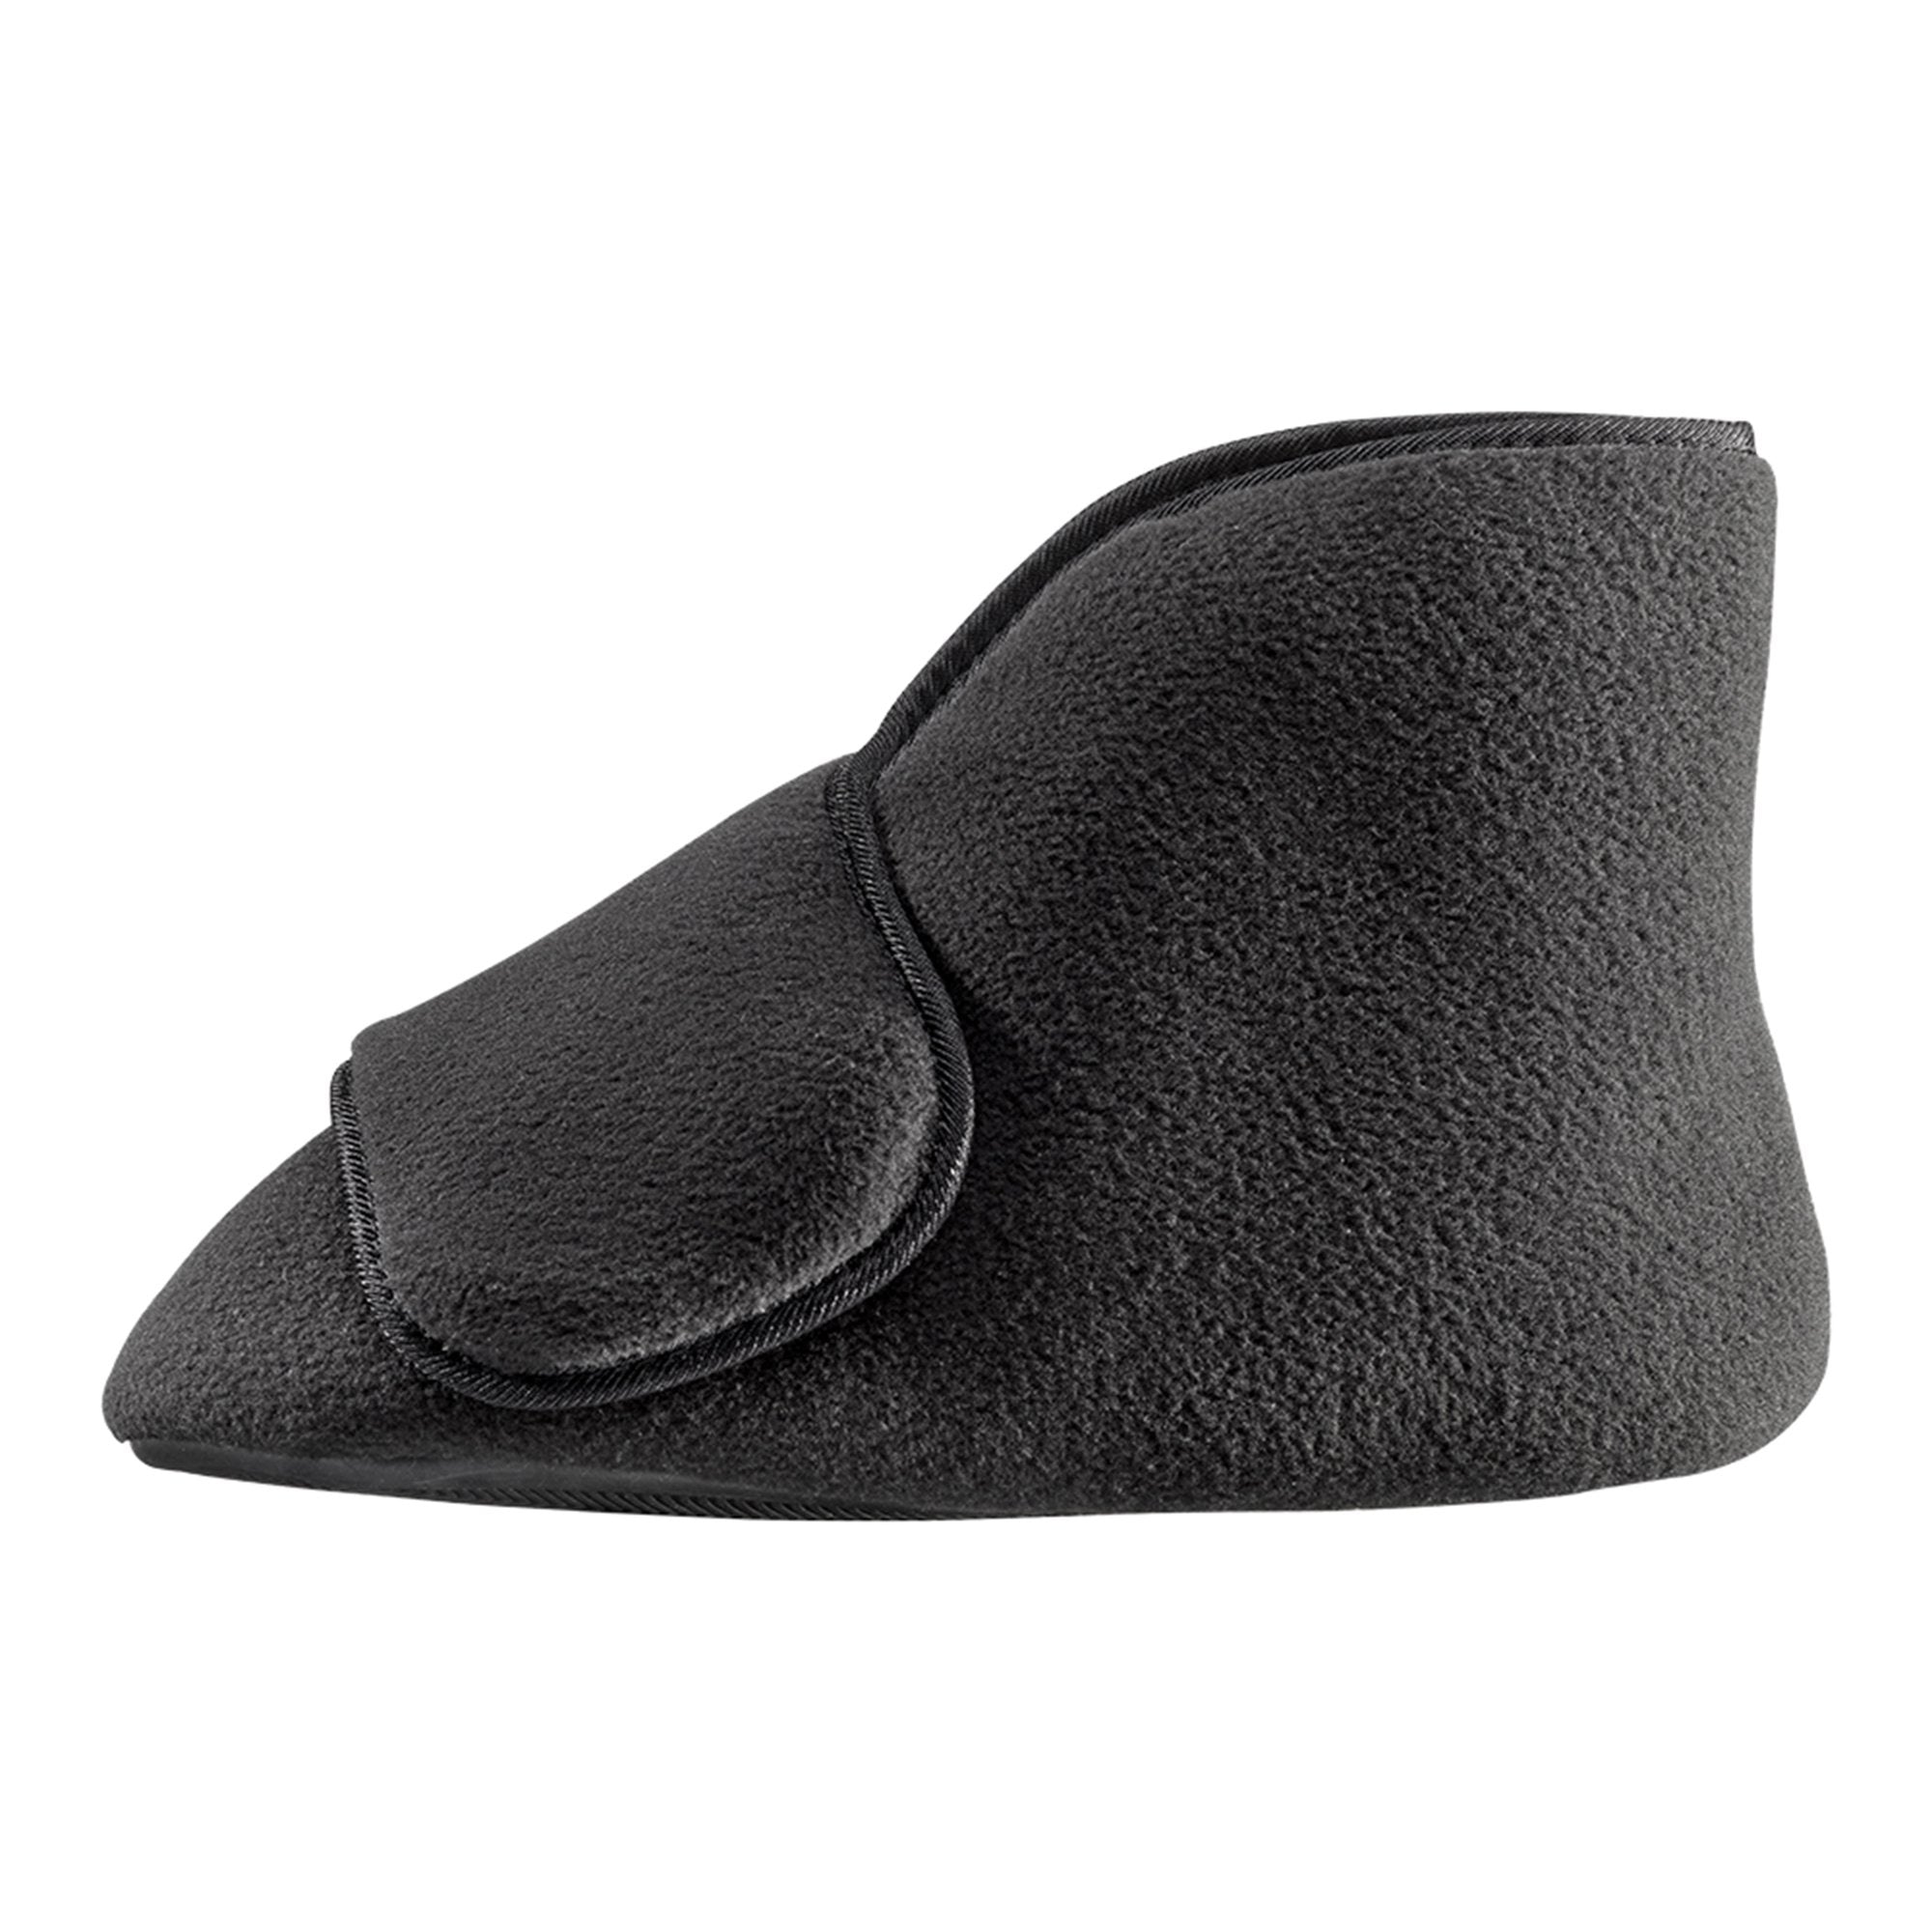 Diabetic Bootie Slippers Silverts X-Large / X-Wide Black Ankle High